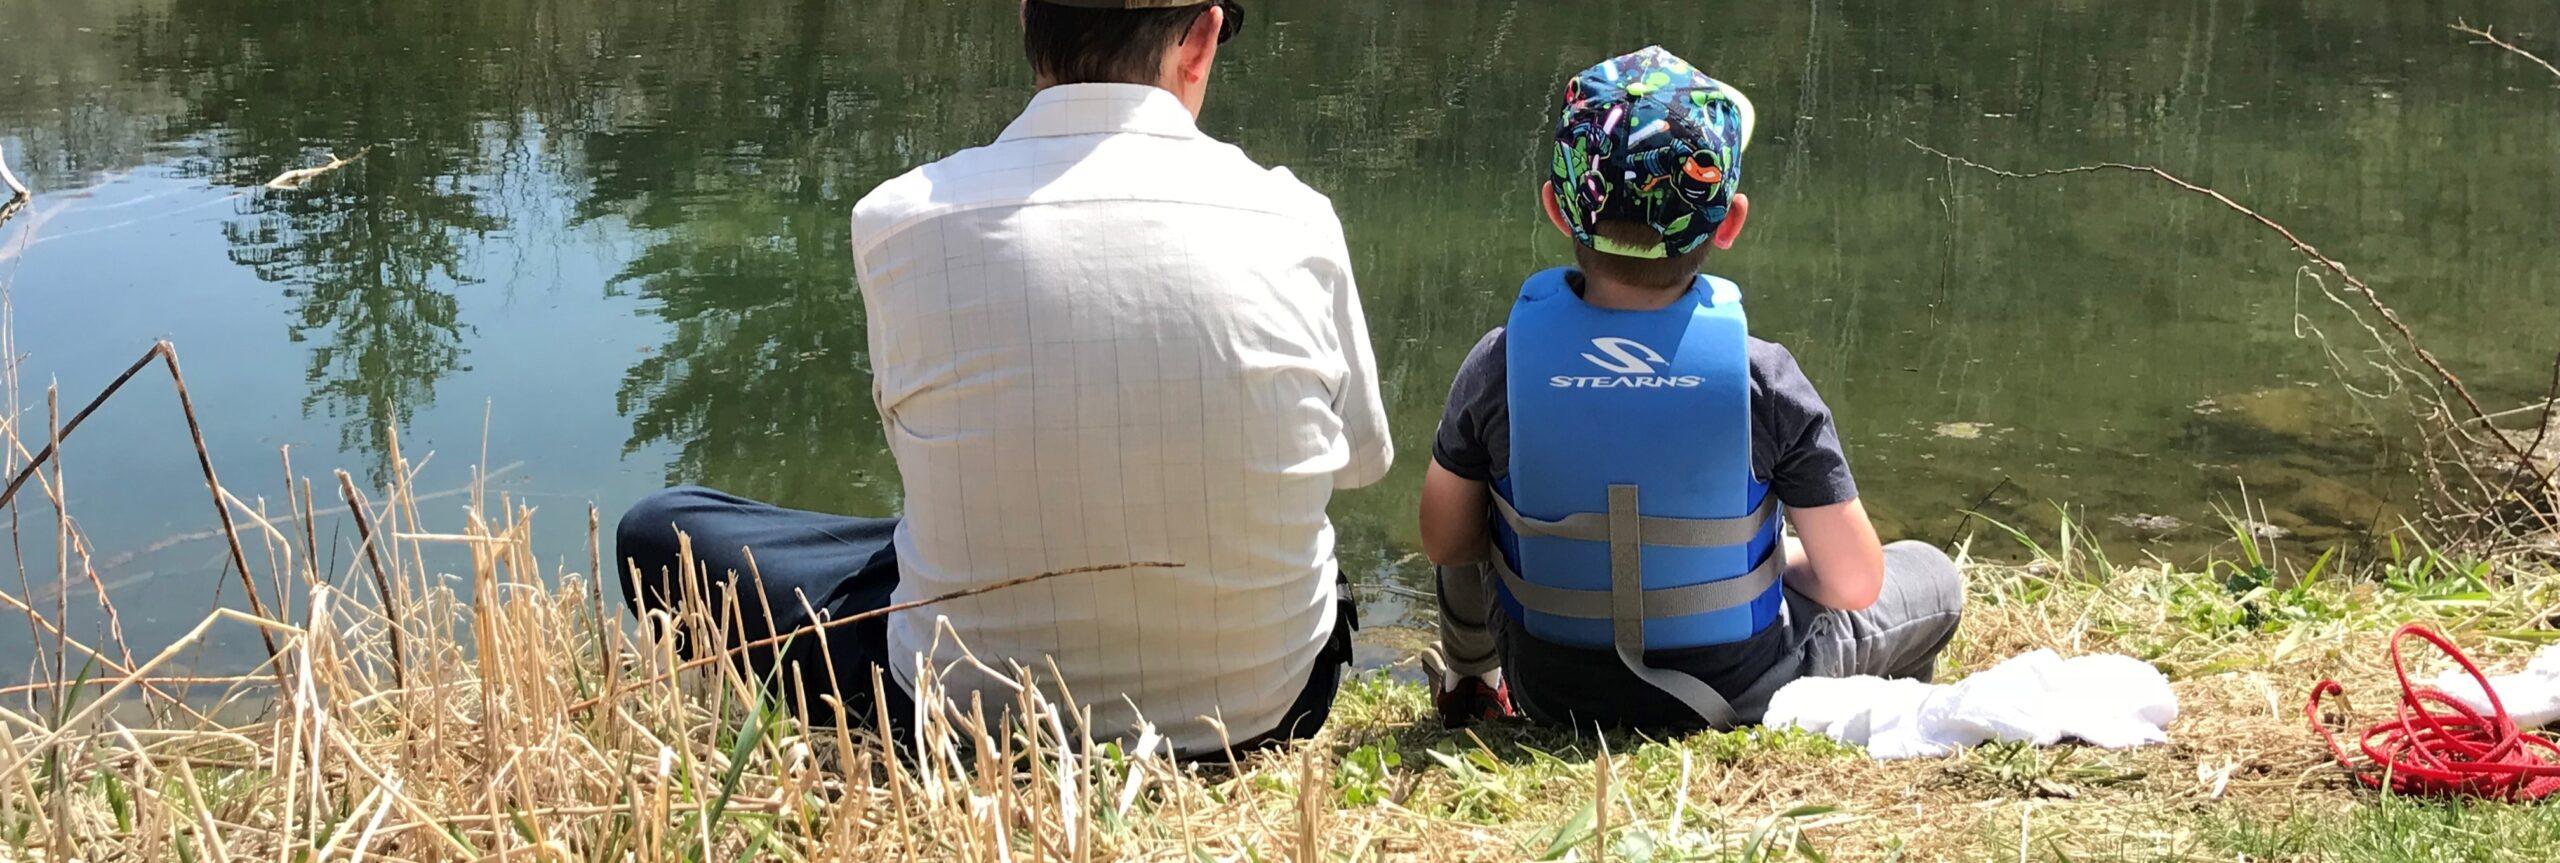 Boy fishing with his grandpa at a pond